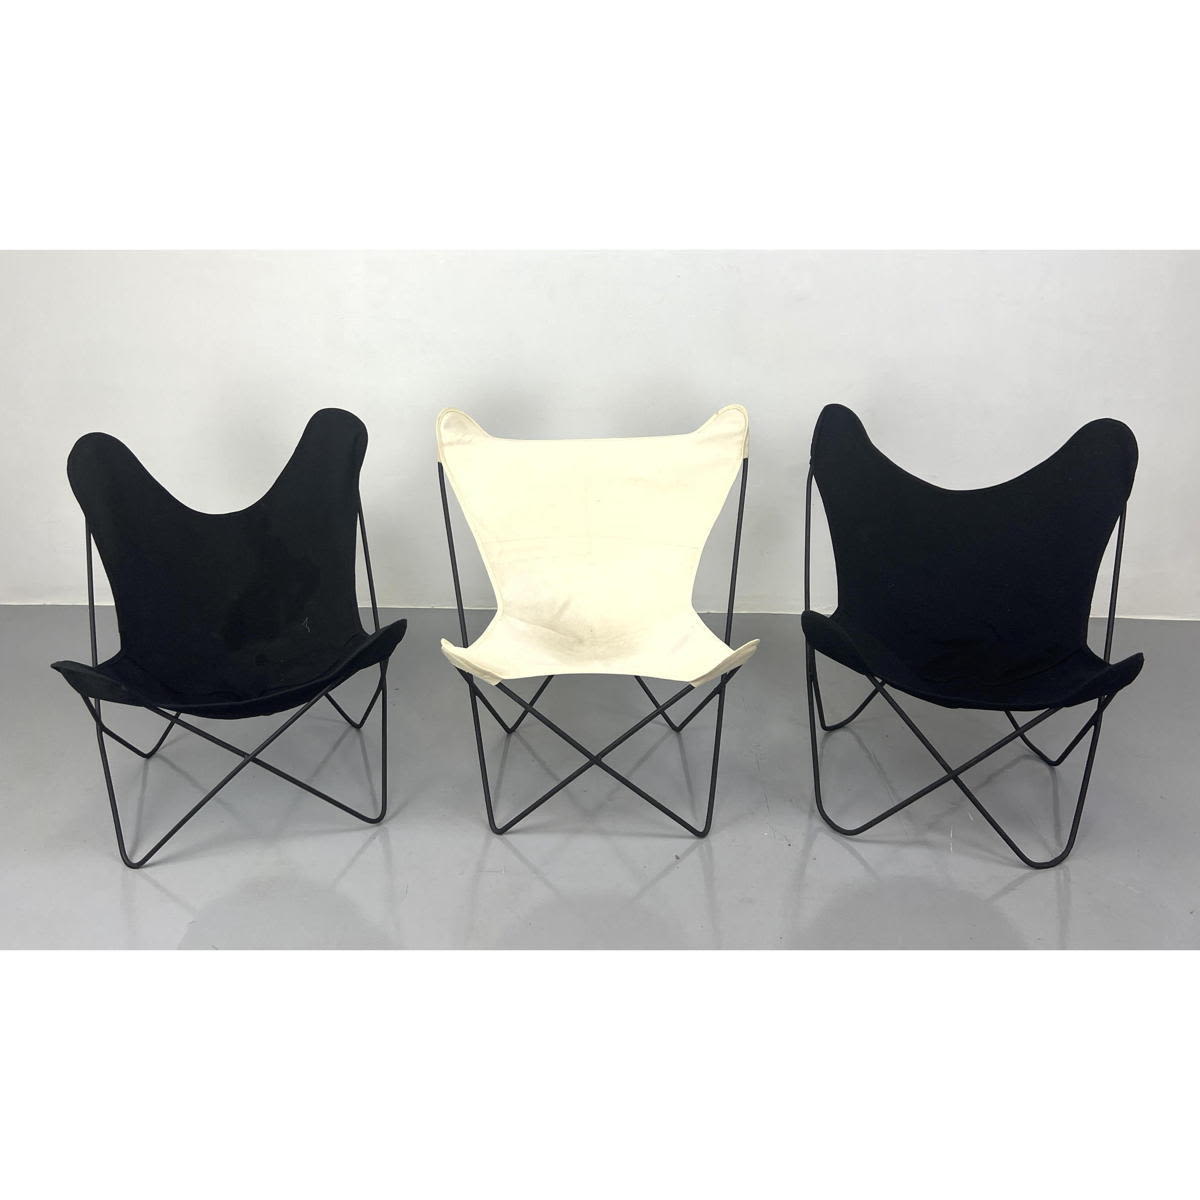 3 Knoll Hardoy Iron butterfly Chairs  2b831e